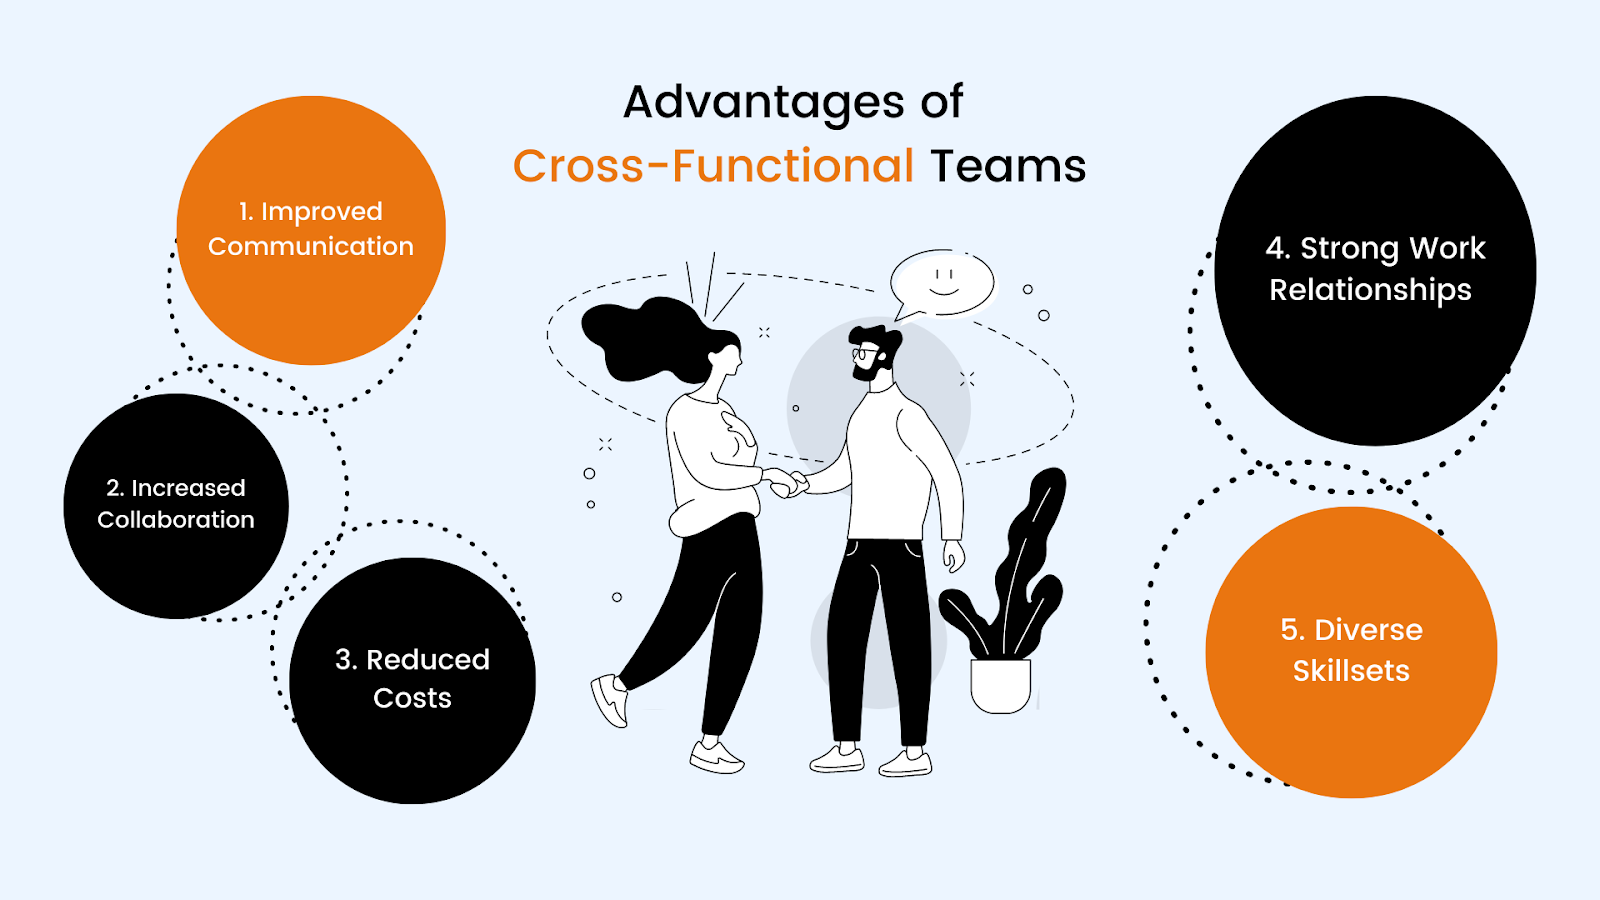 Advantages of cross-functional teams